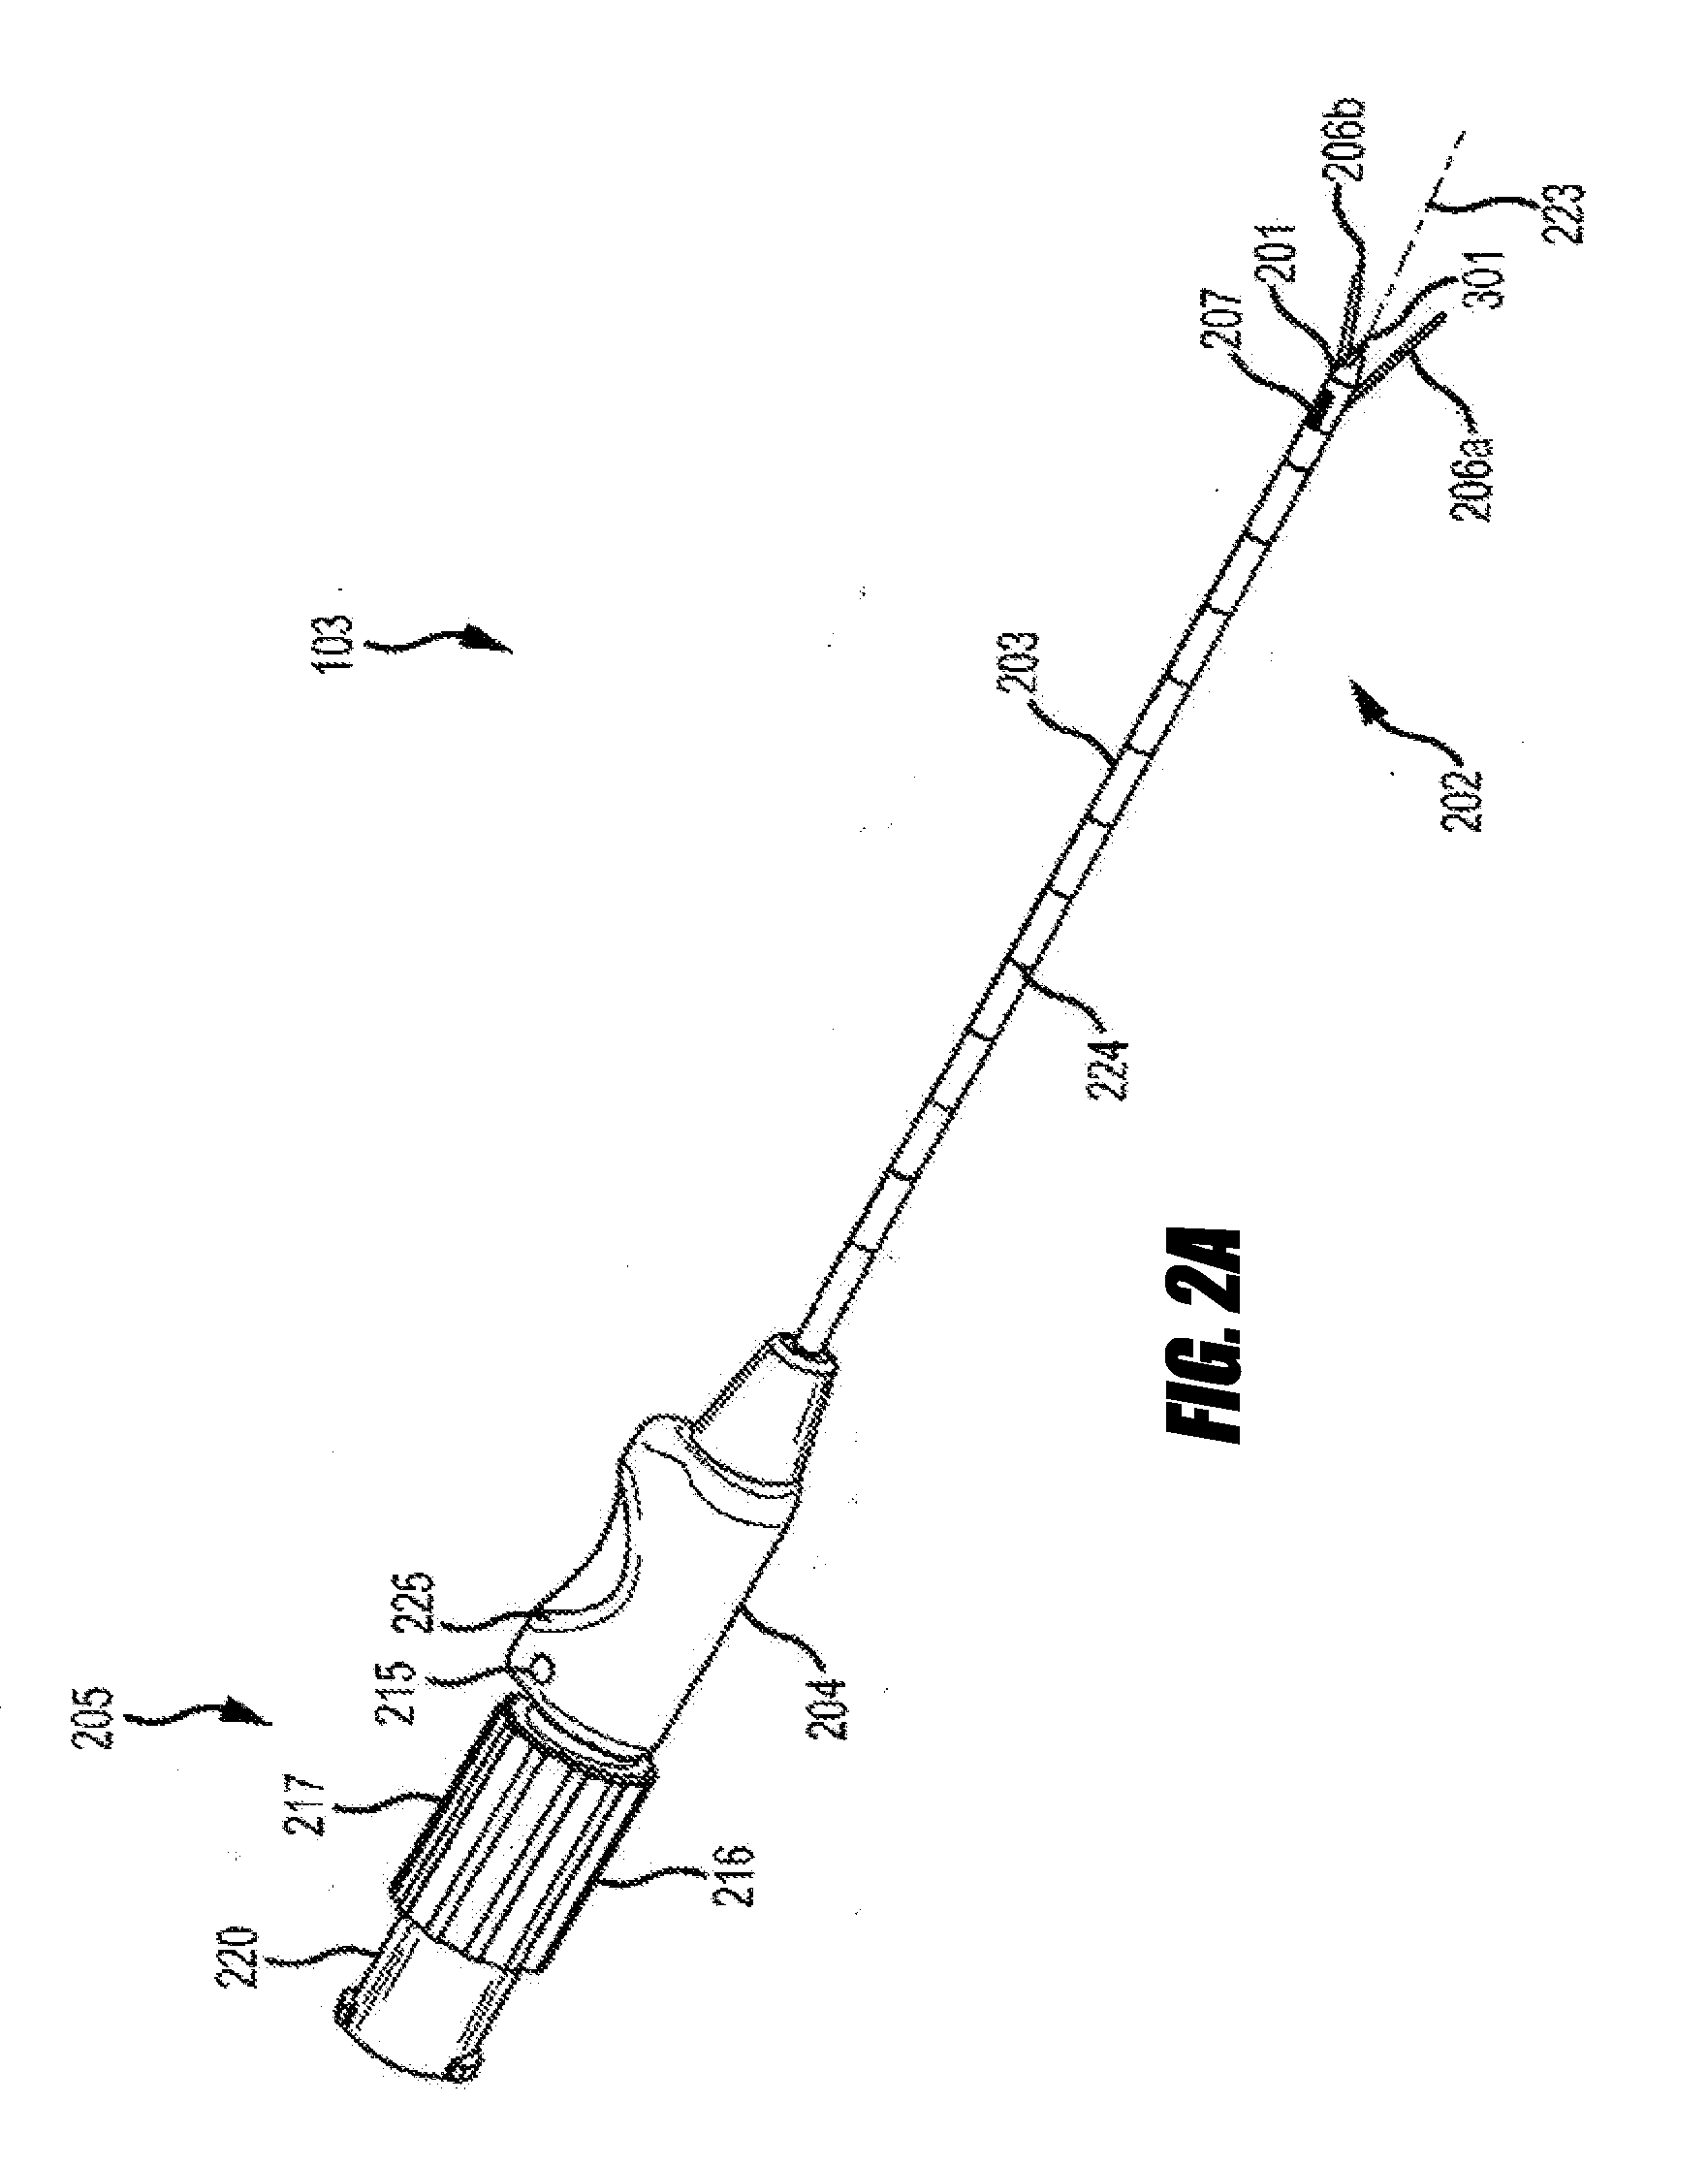 Systems and methods for tissue ablation